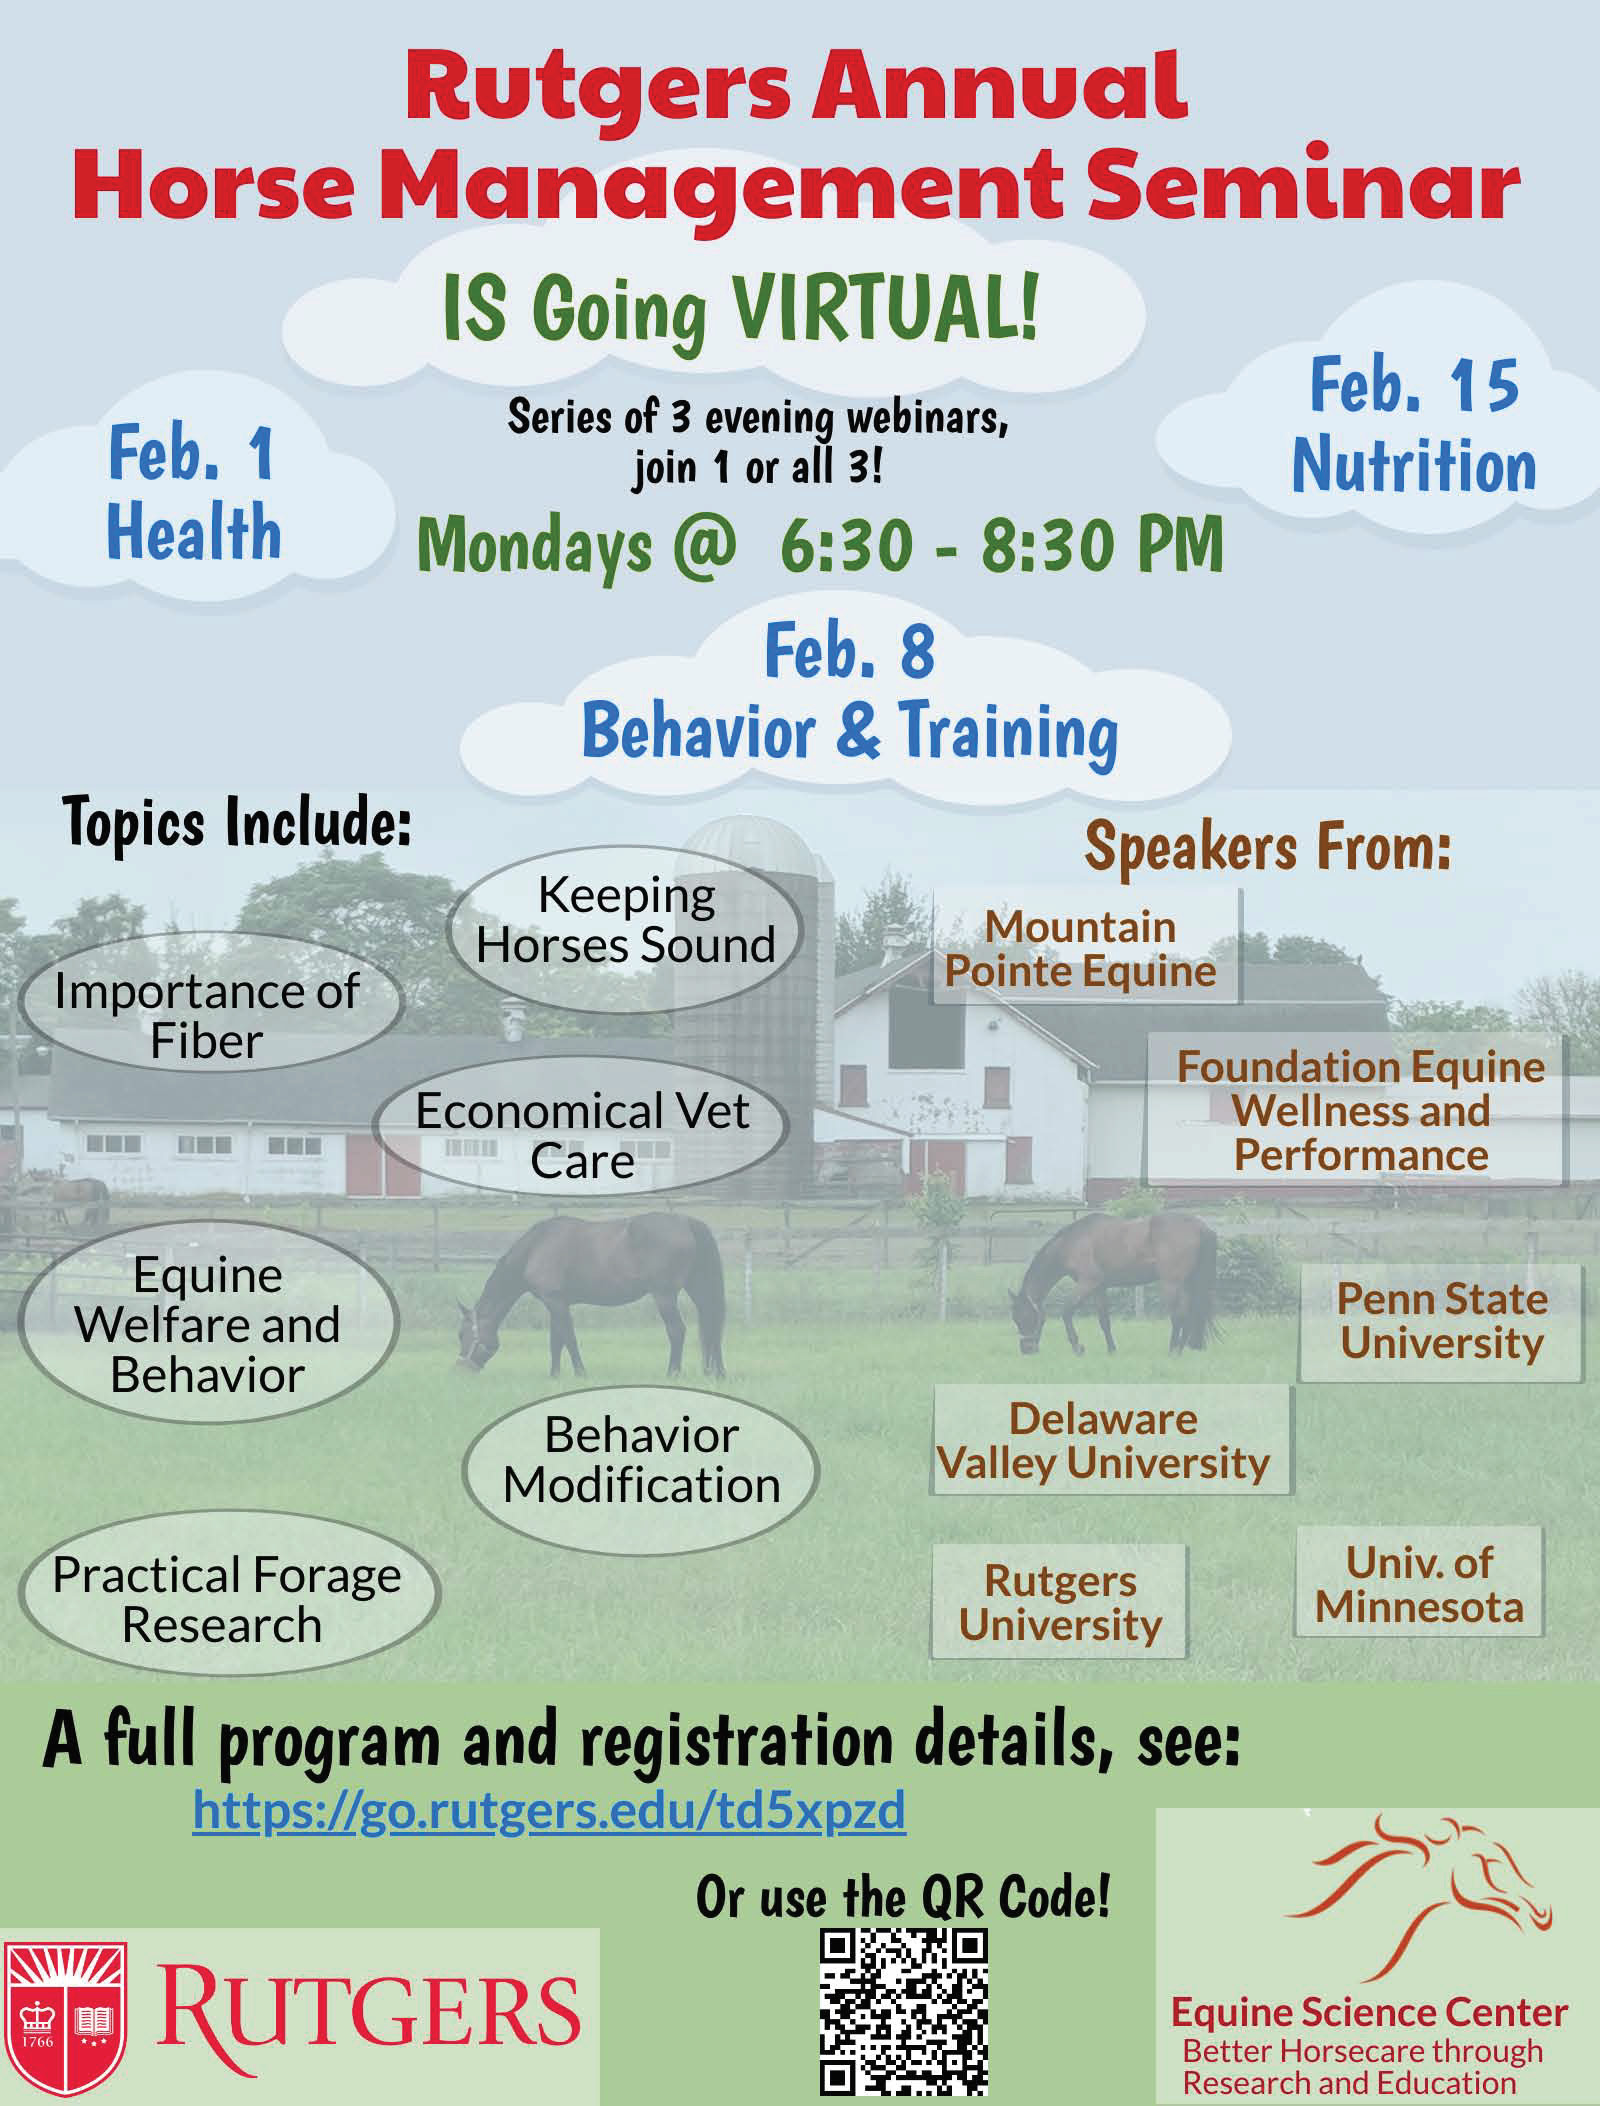 Press Release: Rutgers' Annual Horse Management Seminar Goes Virtual! |  Equine Science Center